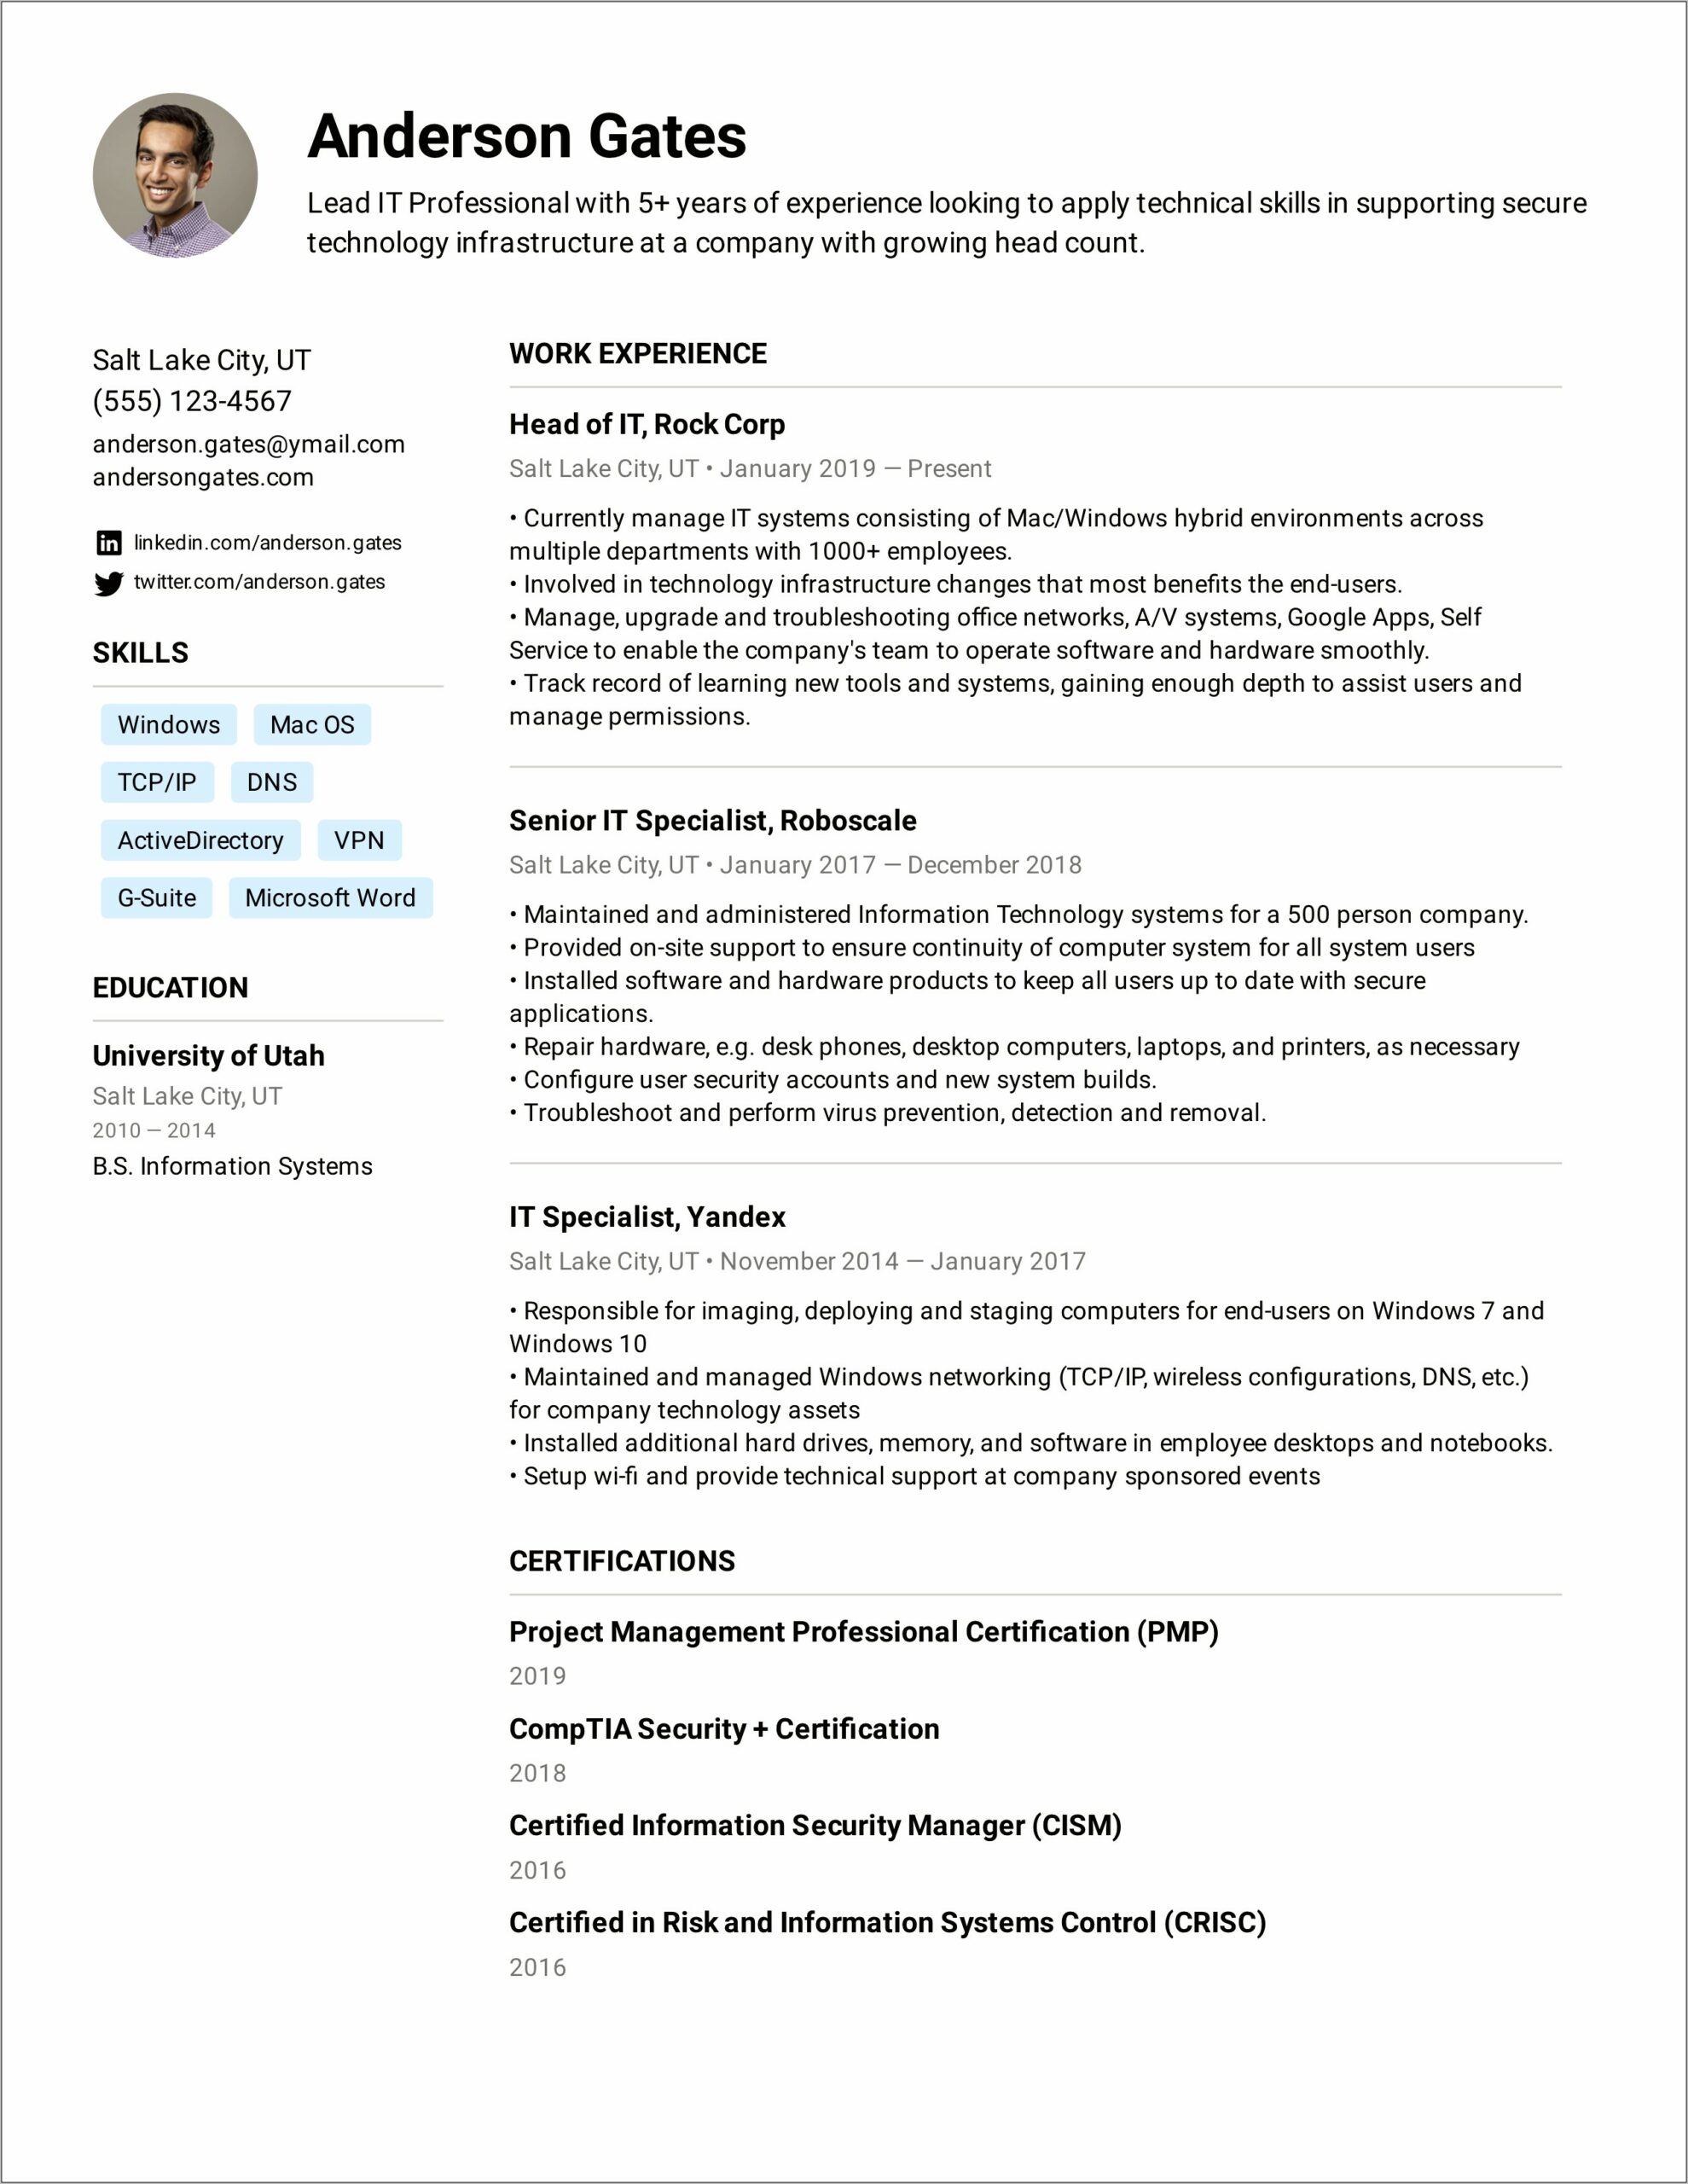 Sample Resume Summary For A Lead Specialist Job